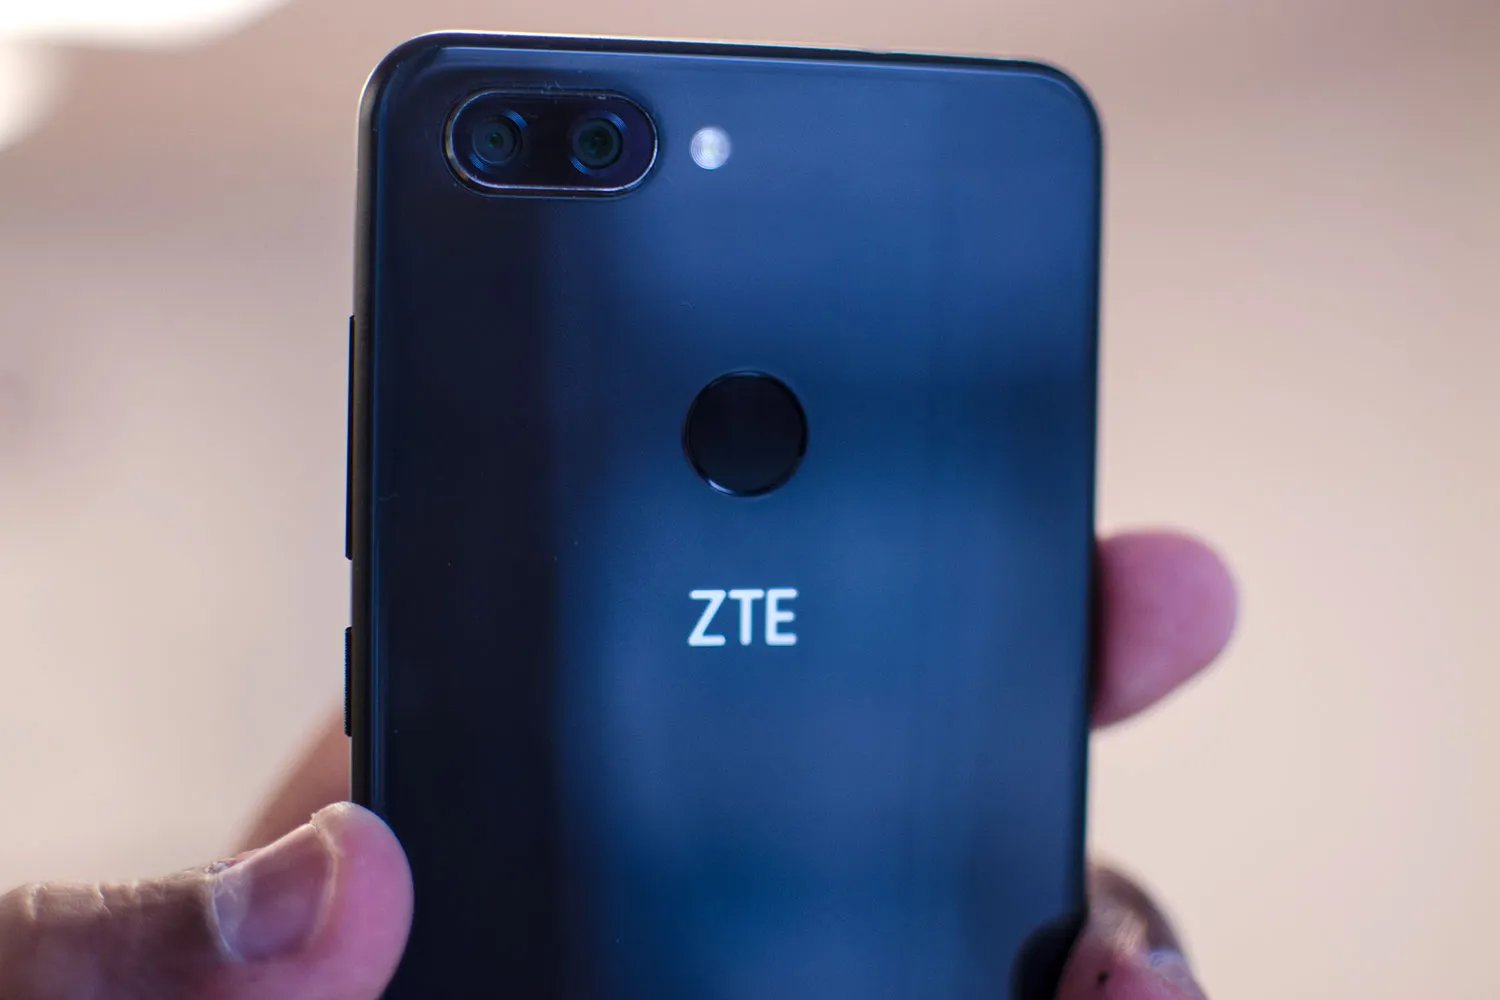 zte-at-mwc-2023-blade-v9-blade-v9-vita-and-zte-tempo-go-with-android-go